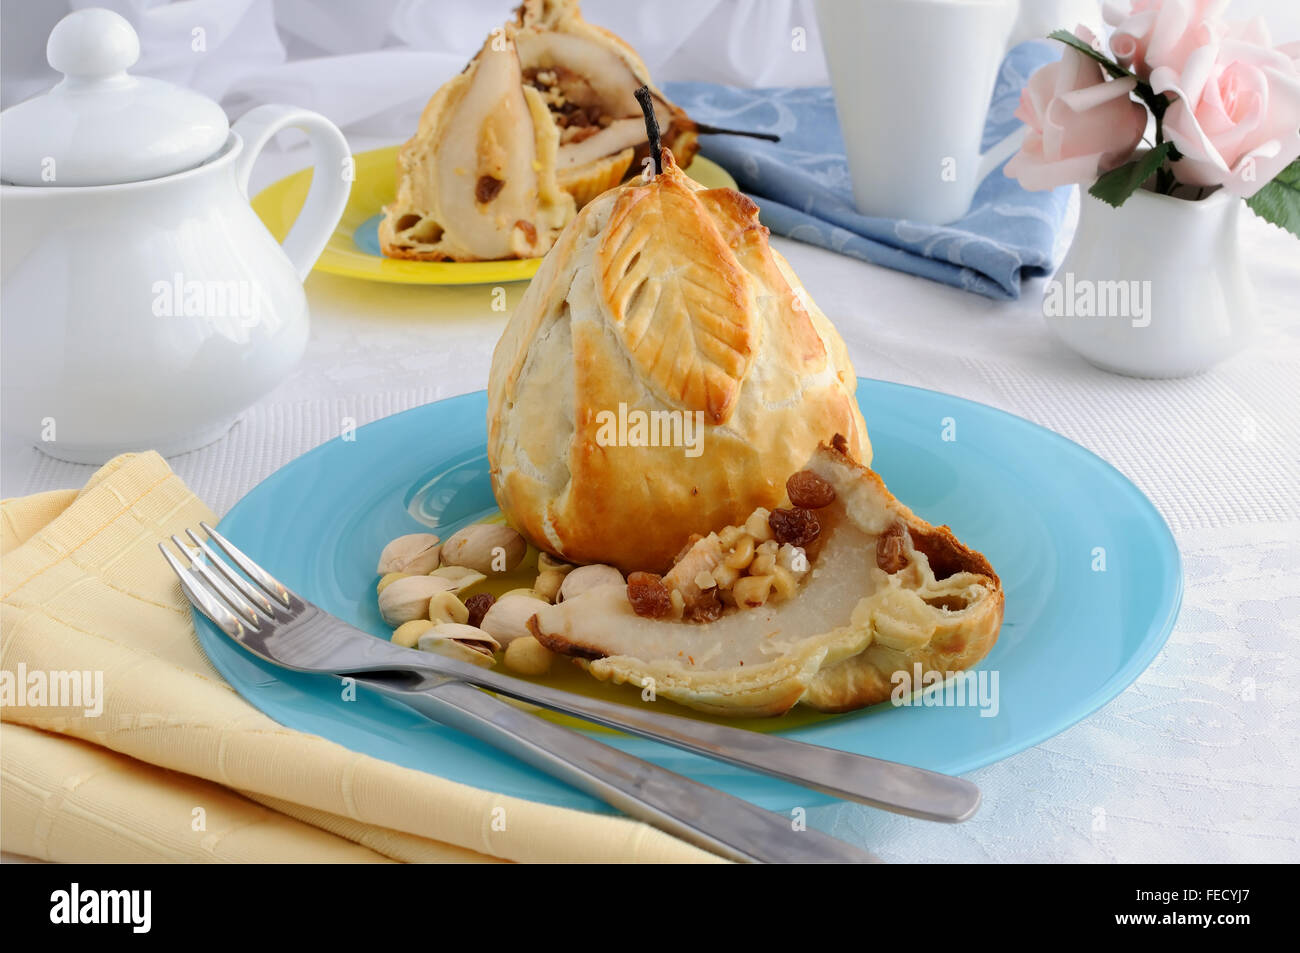 Baked pears stuffed with a mixture of nuts and raisins in the dough Stock Photo